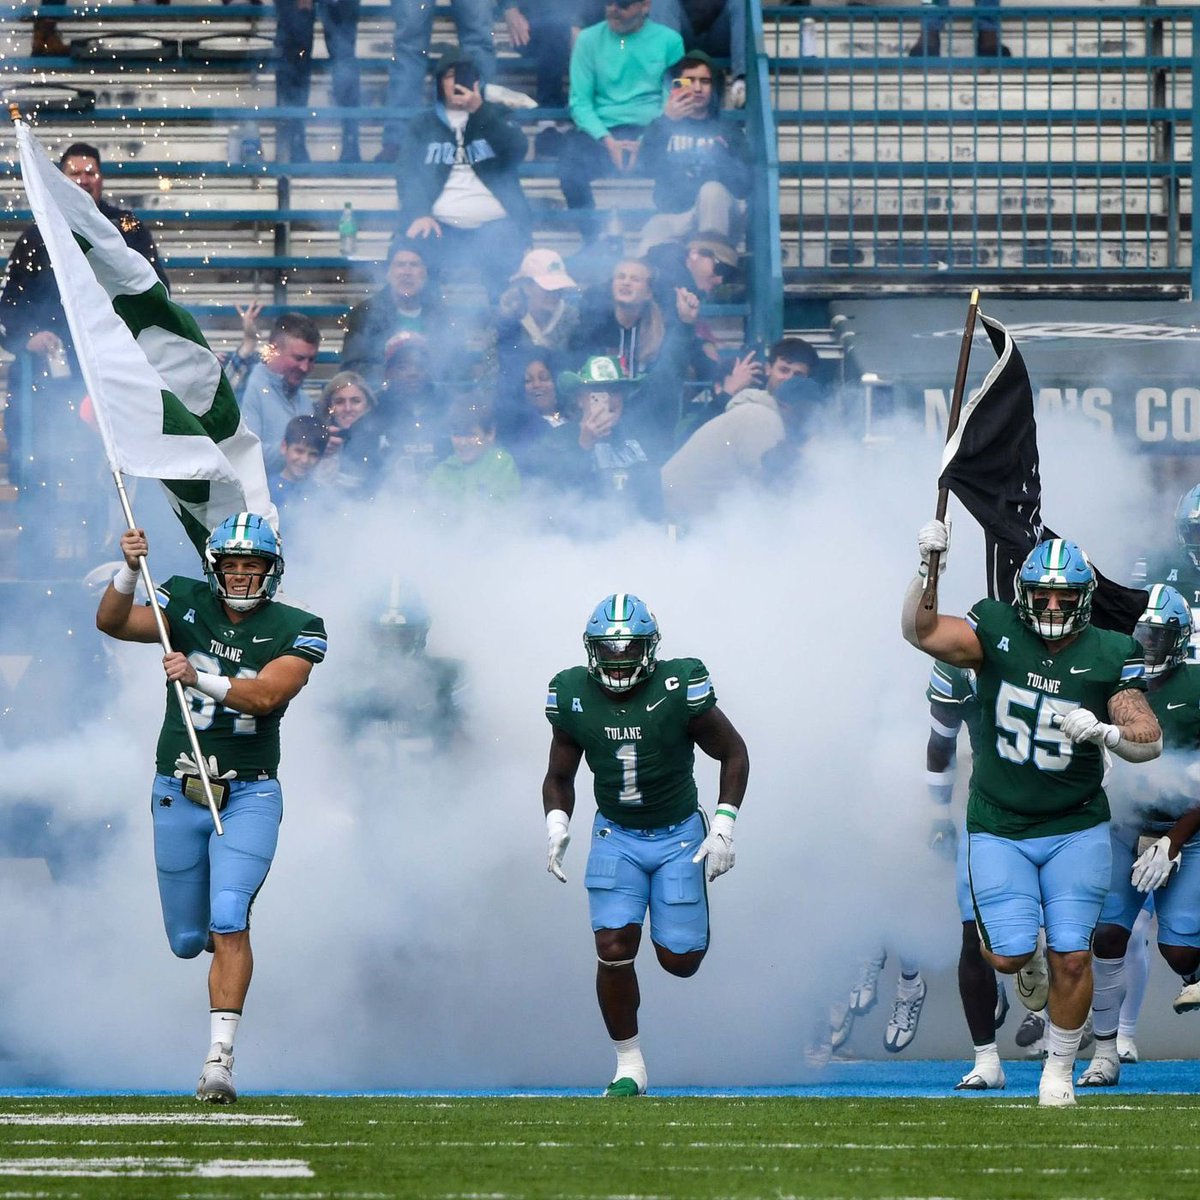 After a great conversation with @CoachWilk04 I am blessed to receive my 4th offer from tulane🌊🌊@CoachKnight21 @CoachCandela99 @coachemupchat @Coachkingruss @CartersvilleFB @GreenWaveFB